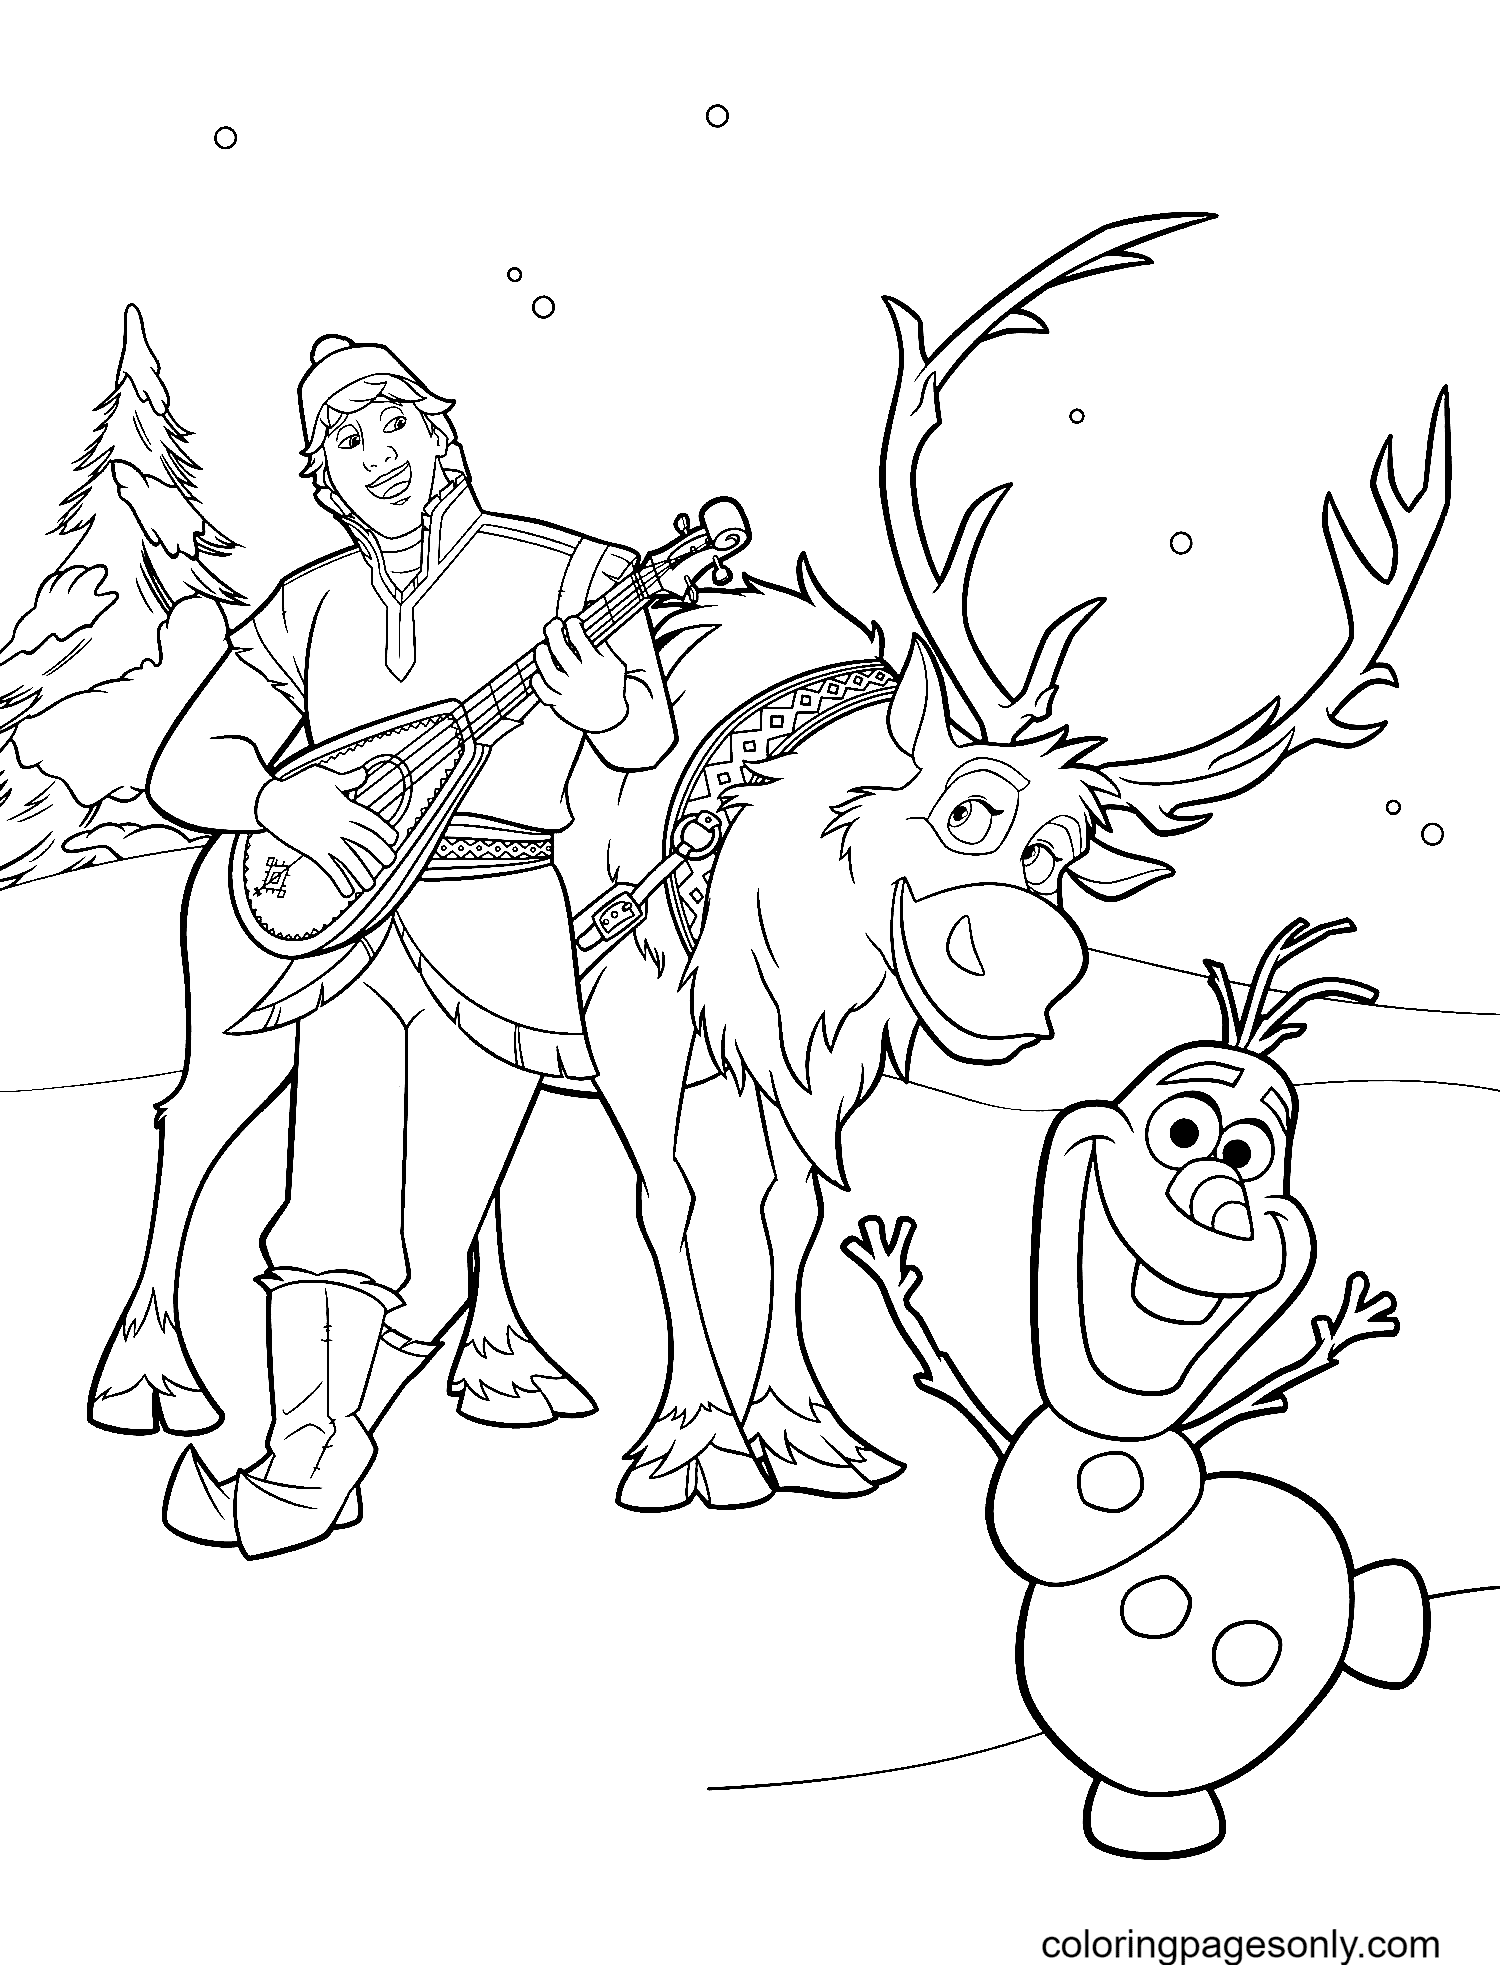 Sven, Kristoff And Olaf Coloring Page